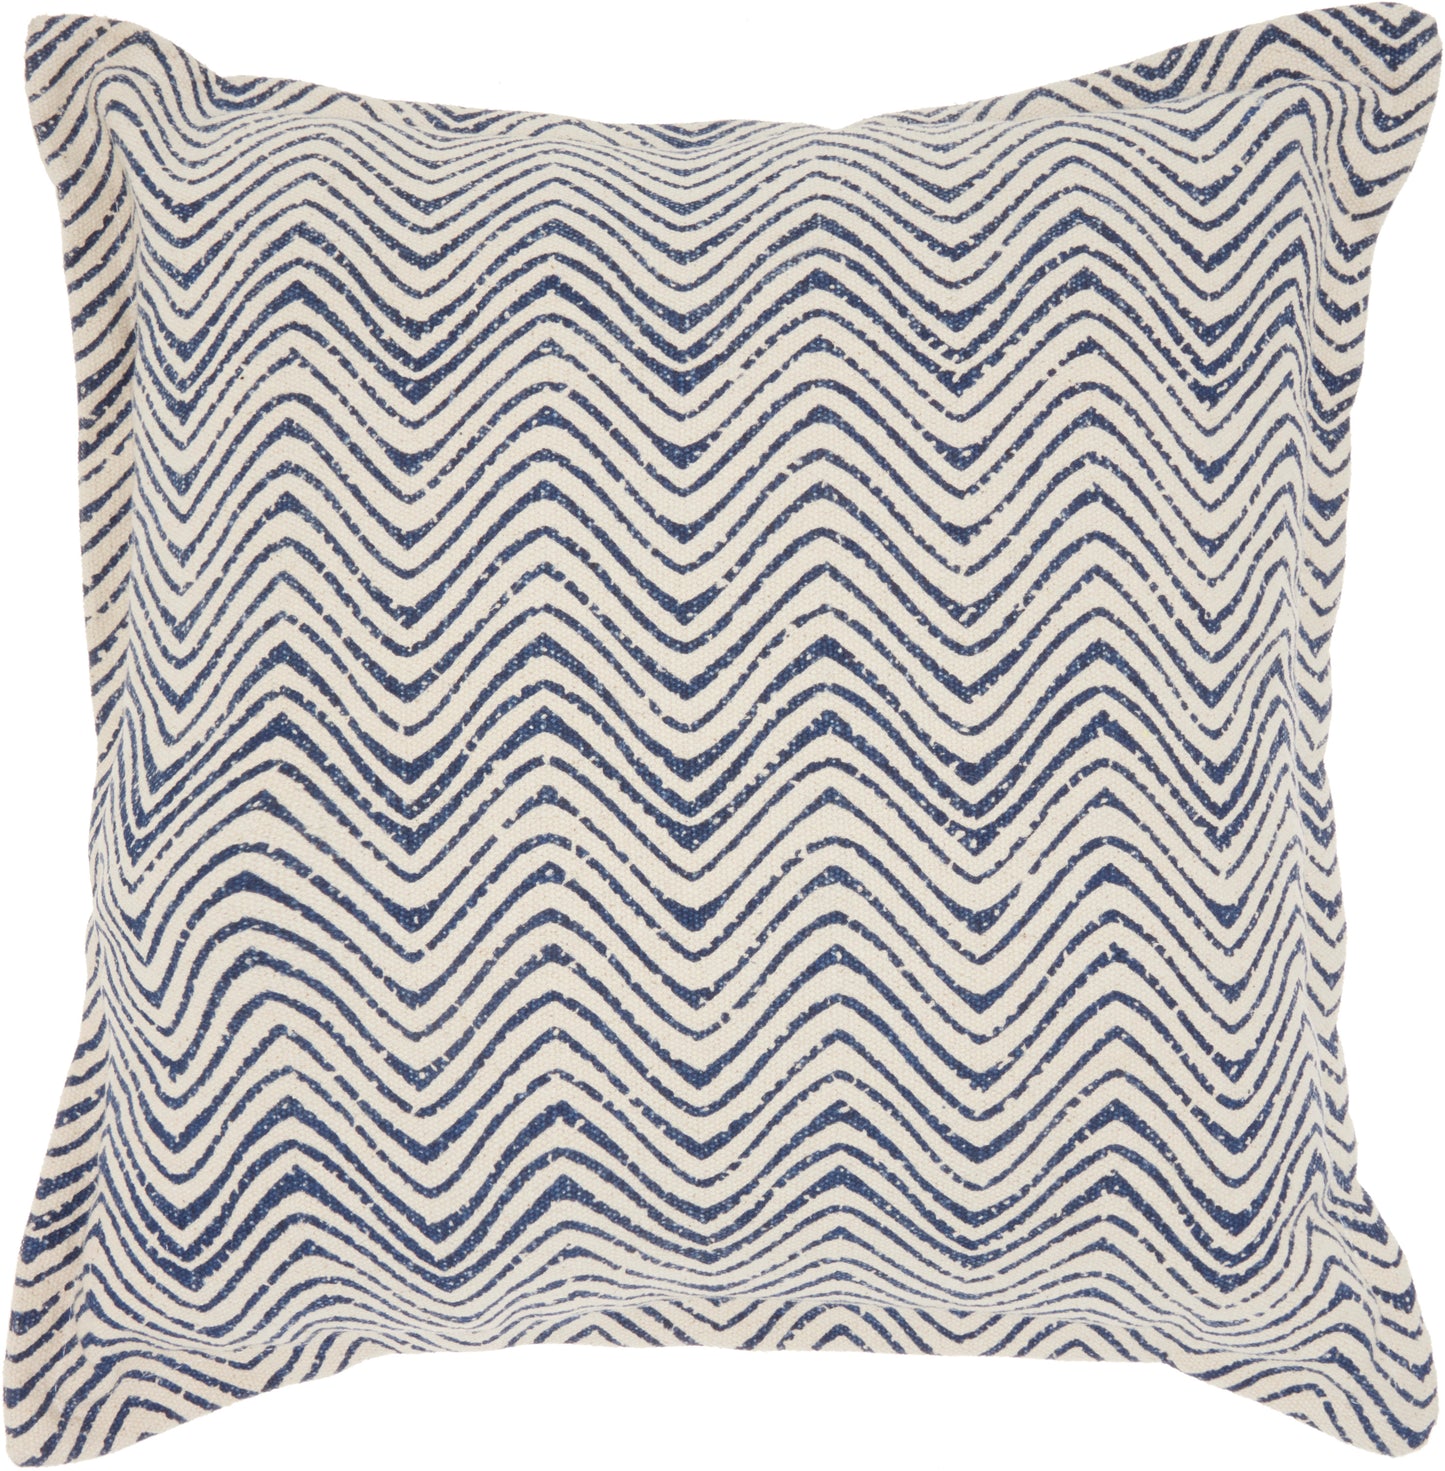 Life Styles DL564 Cotton Printed Waves Throw Pillow From Mina Victory By Nourison Rugs